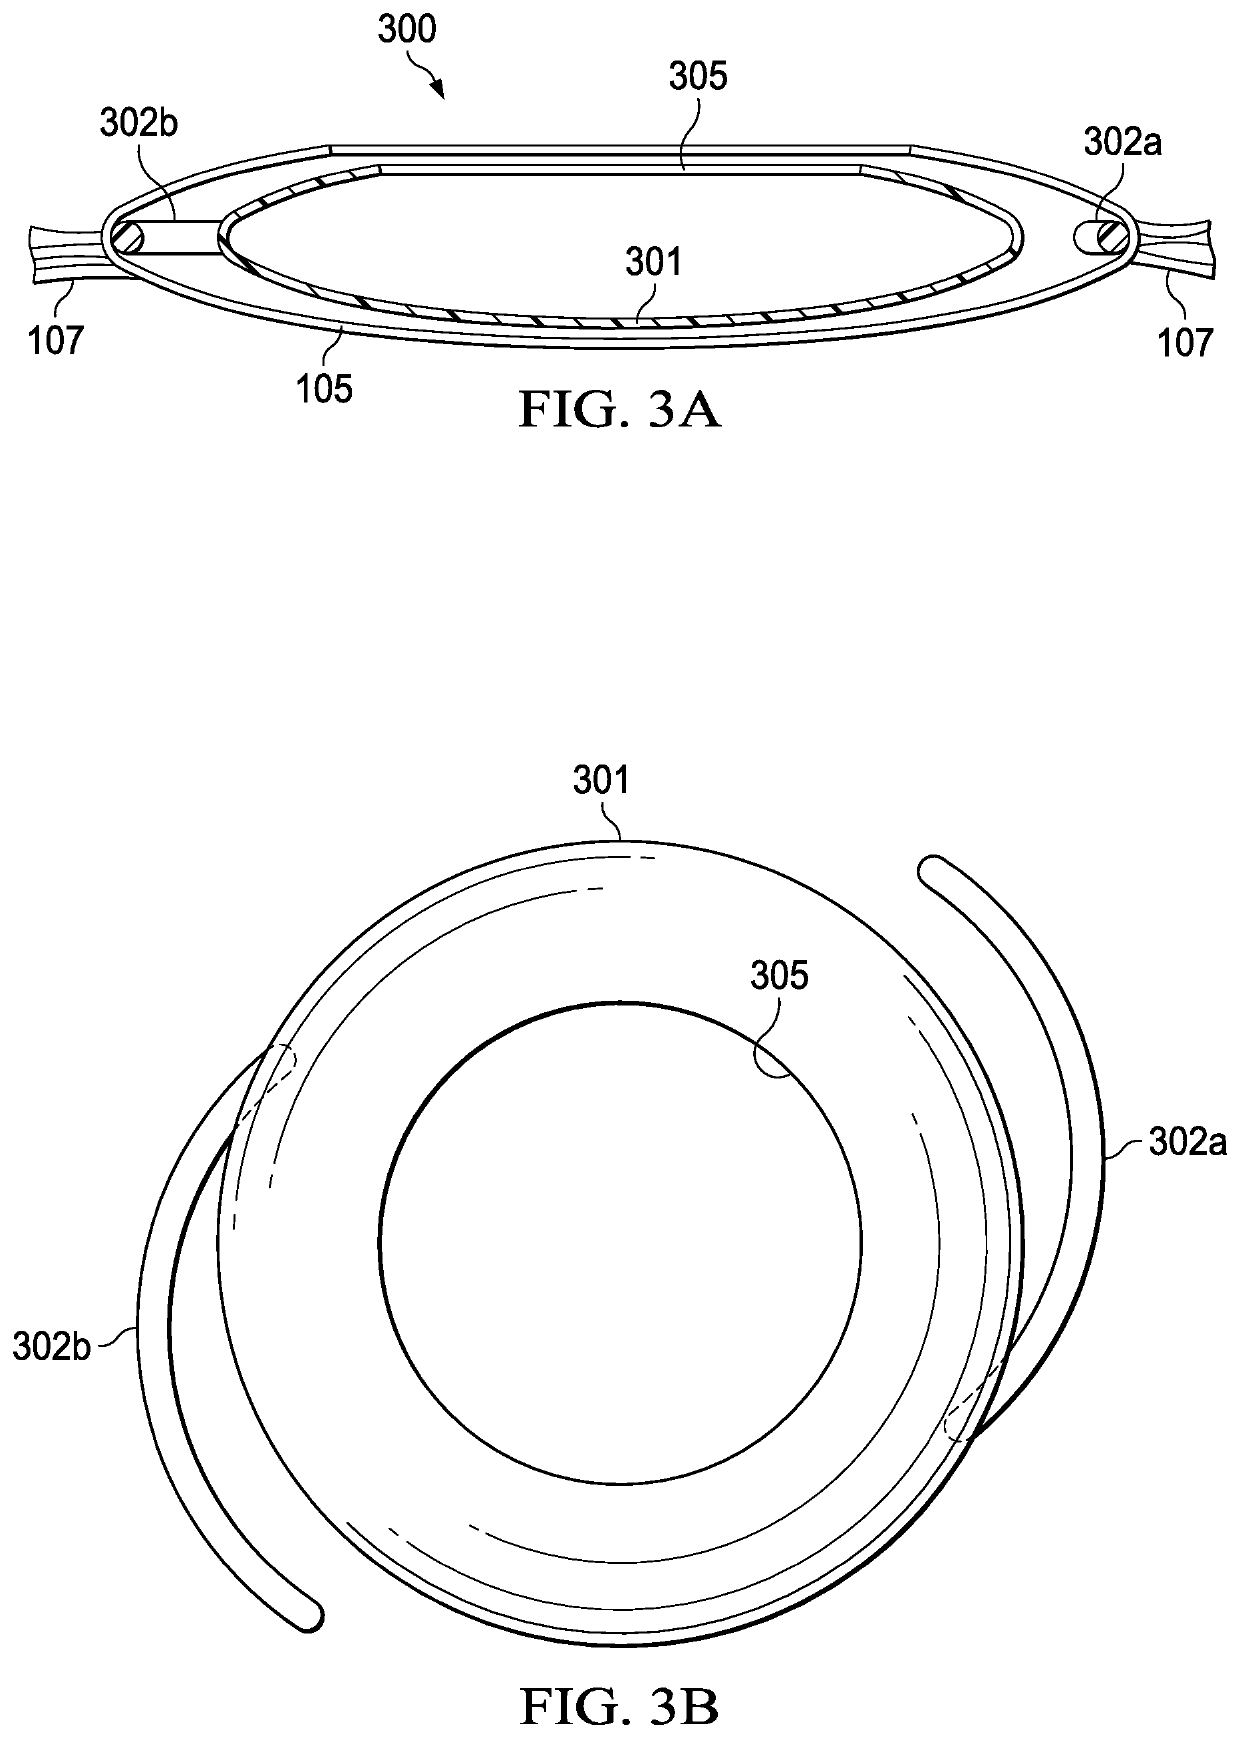 Vision correction systems and methods for using an intraocular lens enclosed in an inner capsulated bag